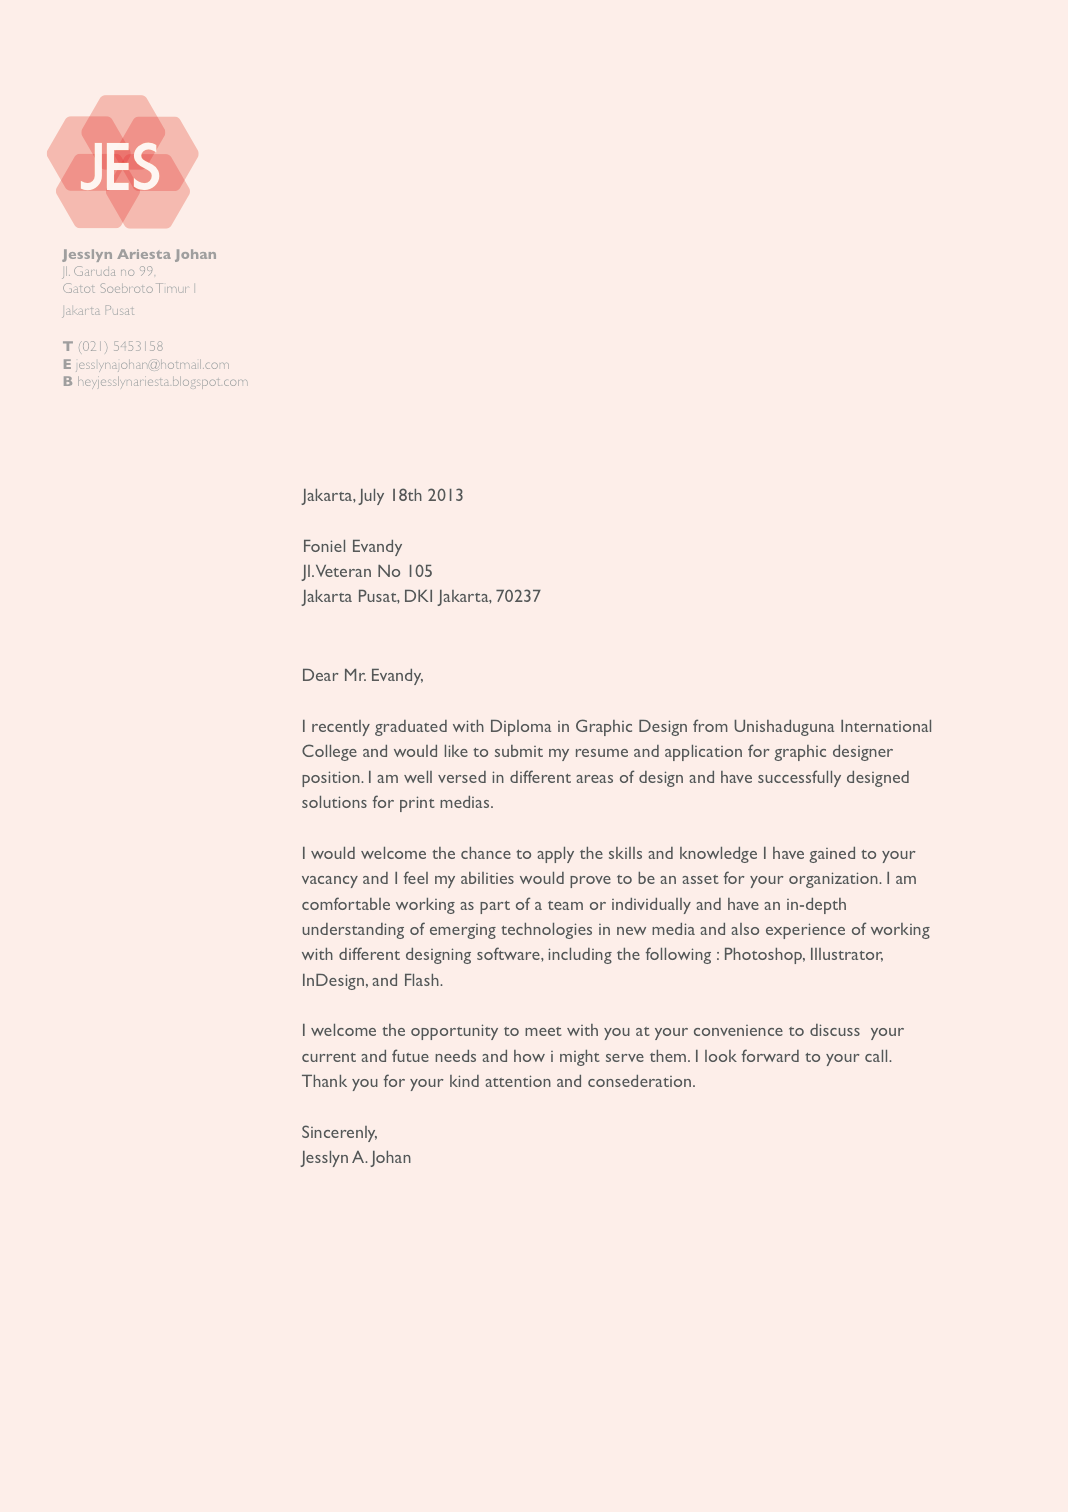 Cover letter examples design job